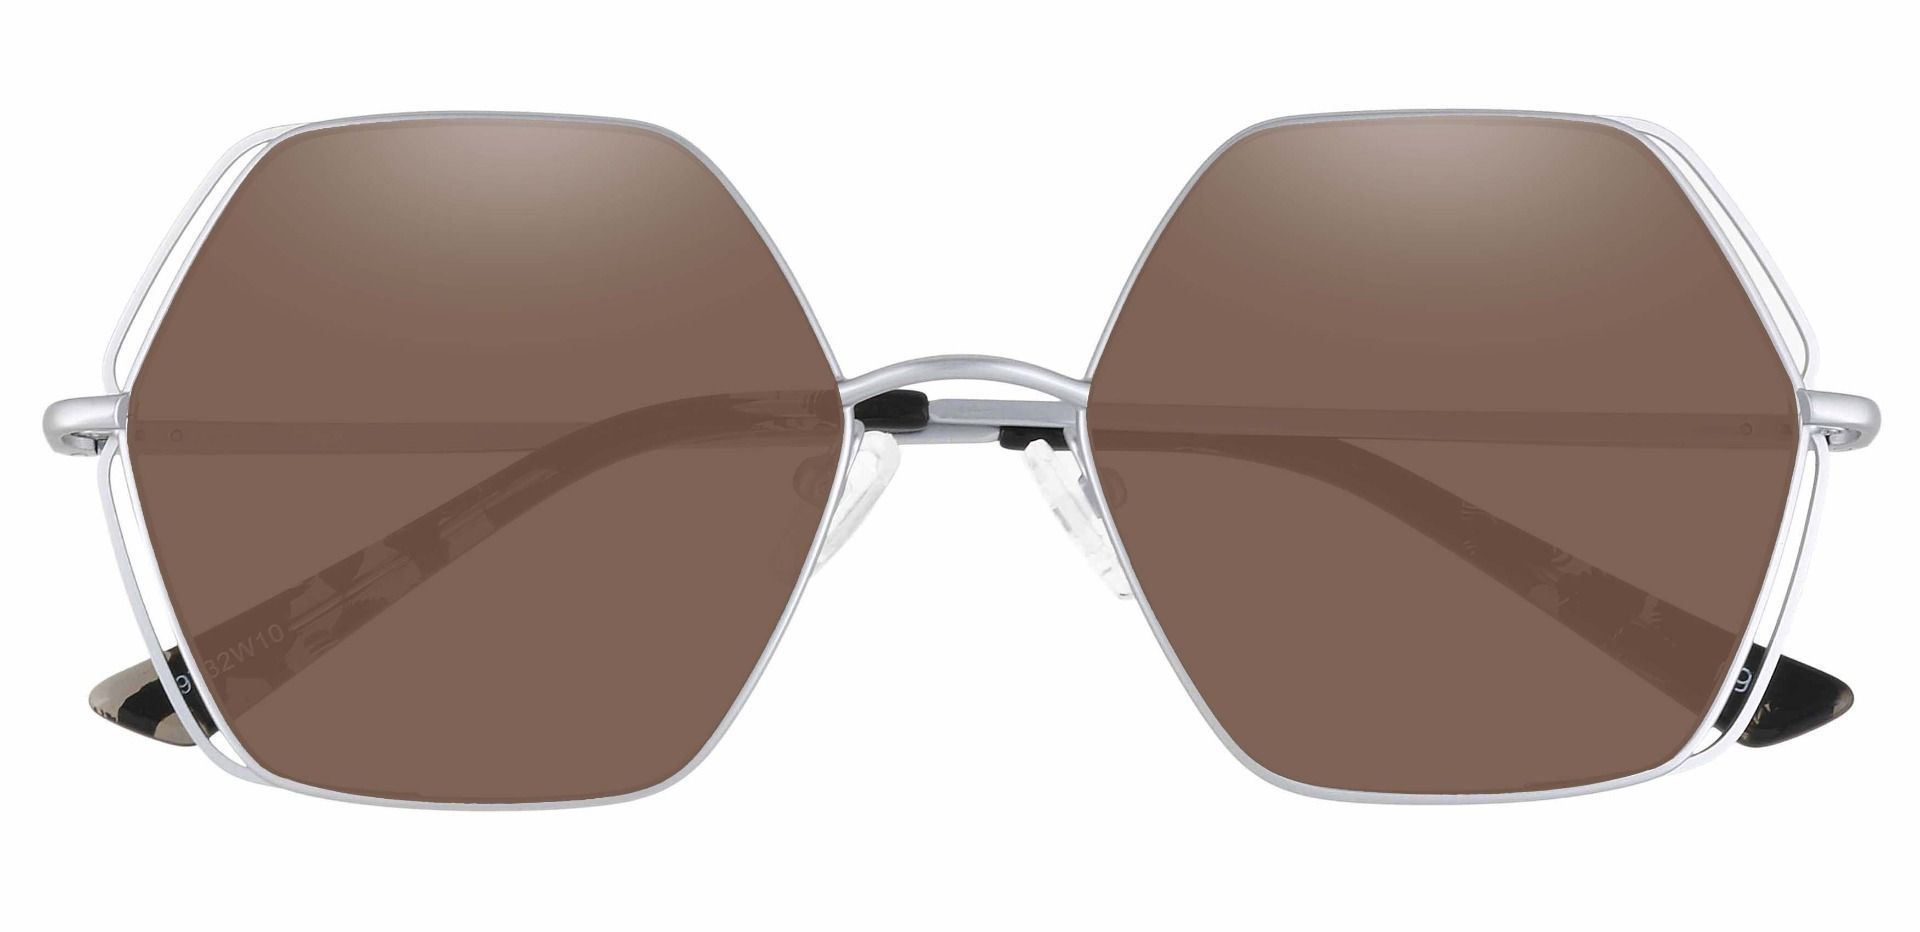 Hawley Geometric Reading Sunglasses - Silver Frame With Brown Lenses